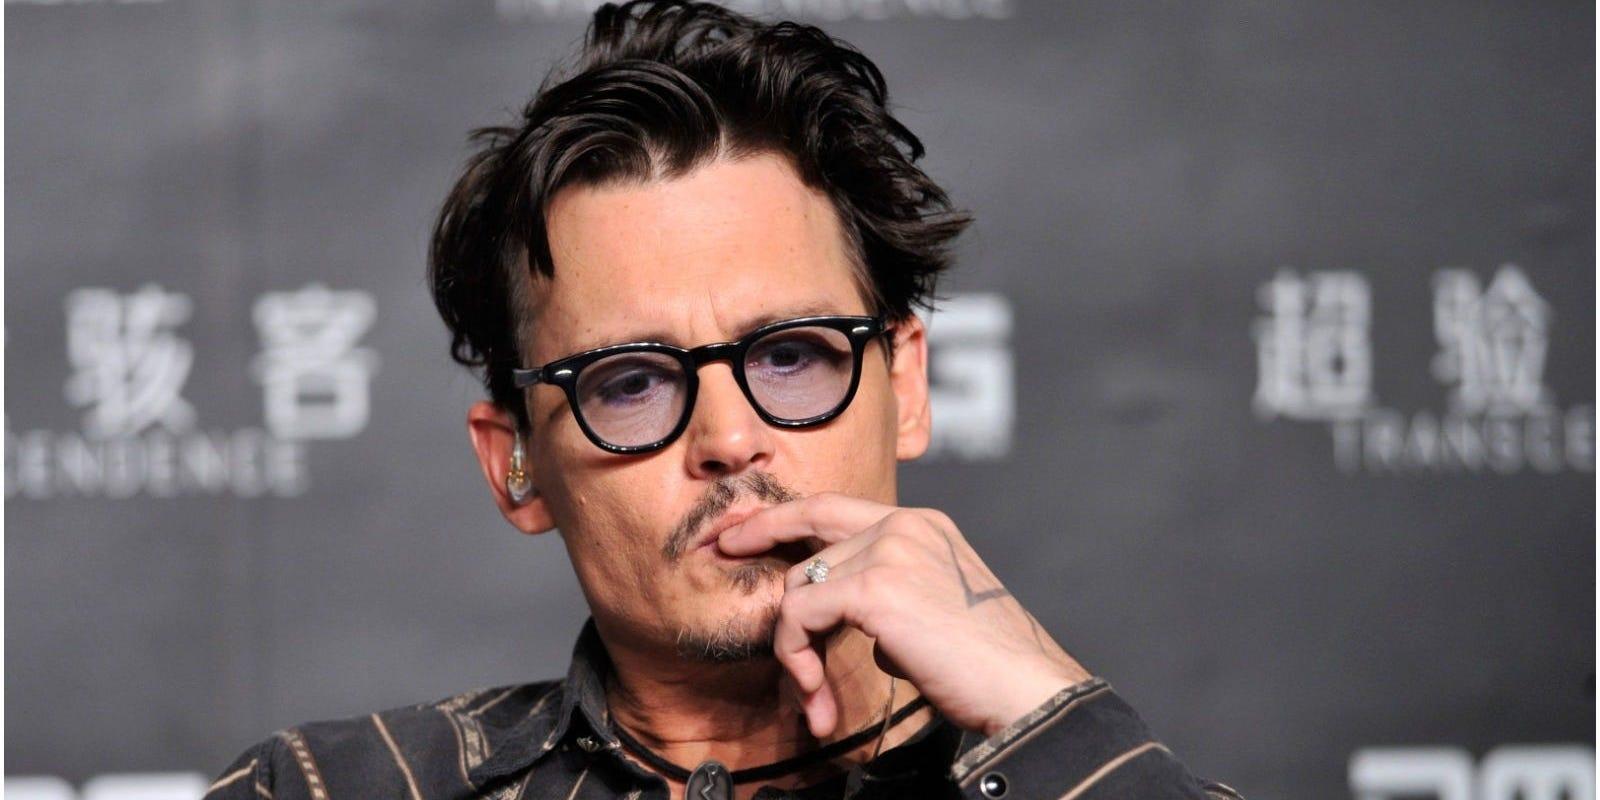 Pirates Of The Caribbean Star Johnny Depp Addresses Dior Perfume Ad  Controversy; Says 'The Film Was Made With Great Respect'